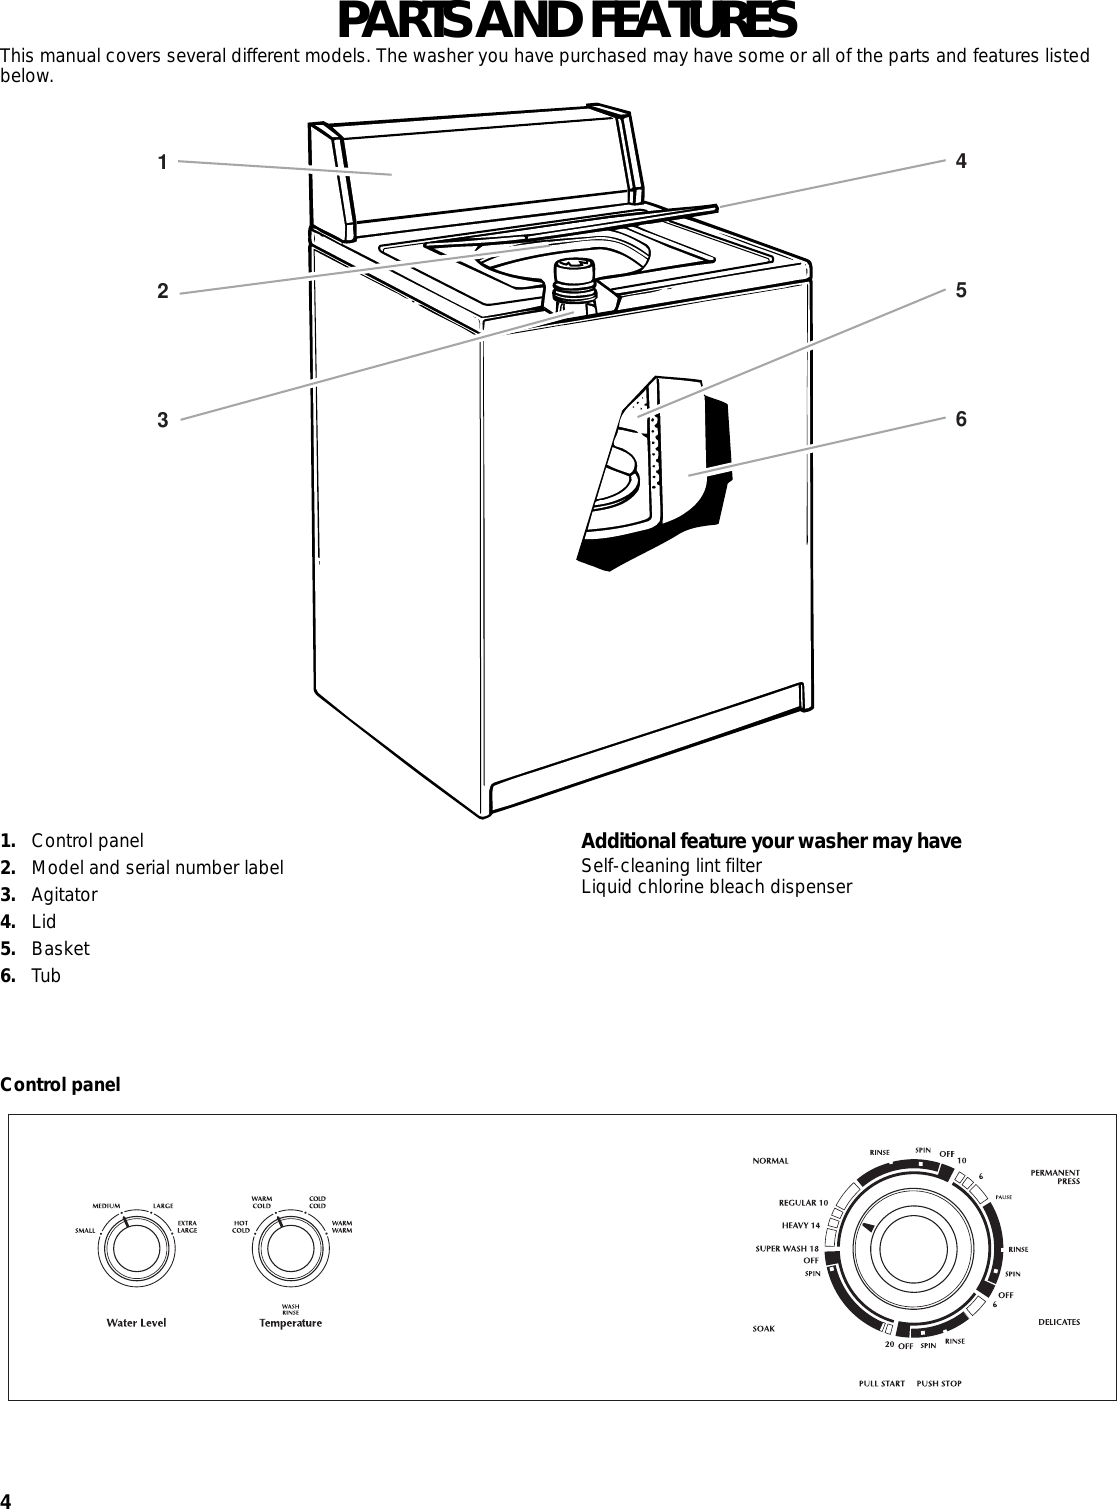 Page 4 of 12 - Whirlpool Whirlpool-Conservator-3953964-Users-Manual- Roper Cover Graphic  Whirlpool-conservator-3953964-users-manual